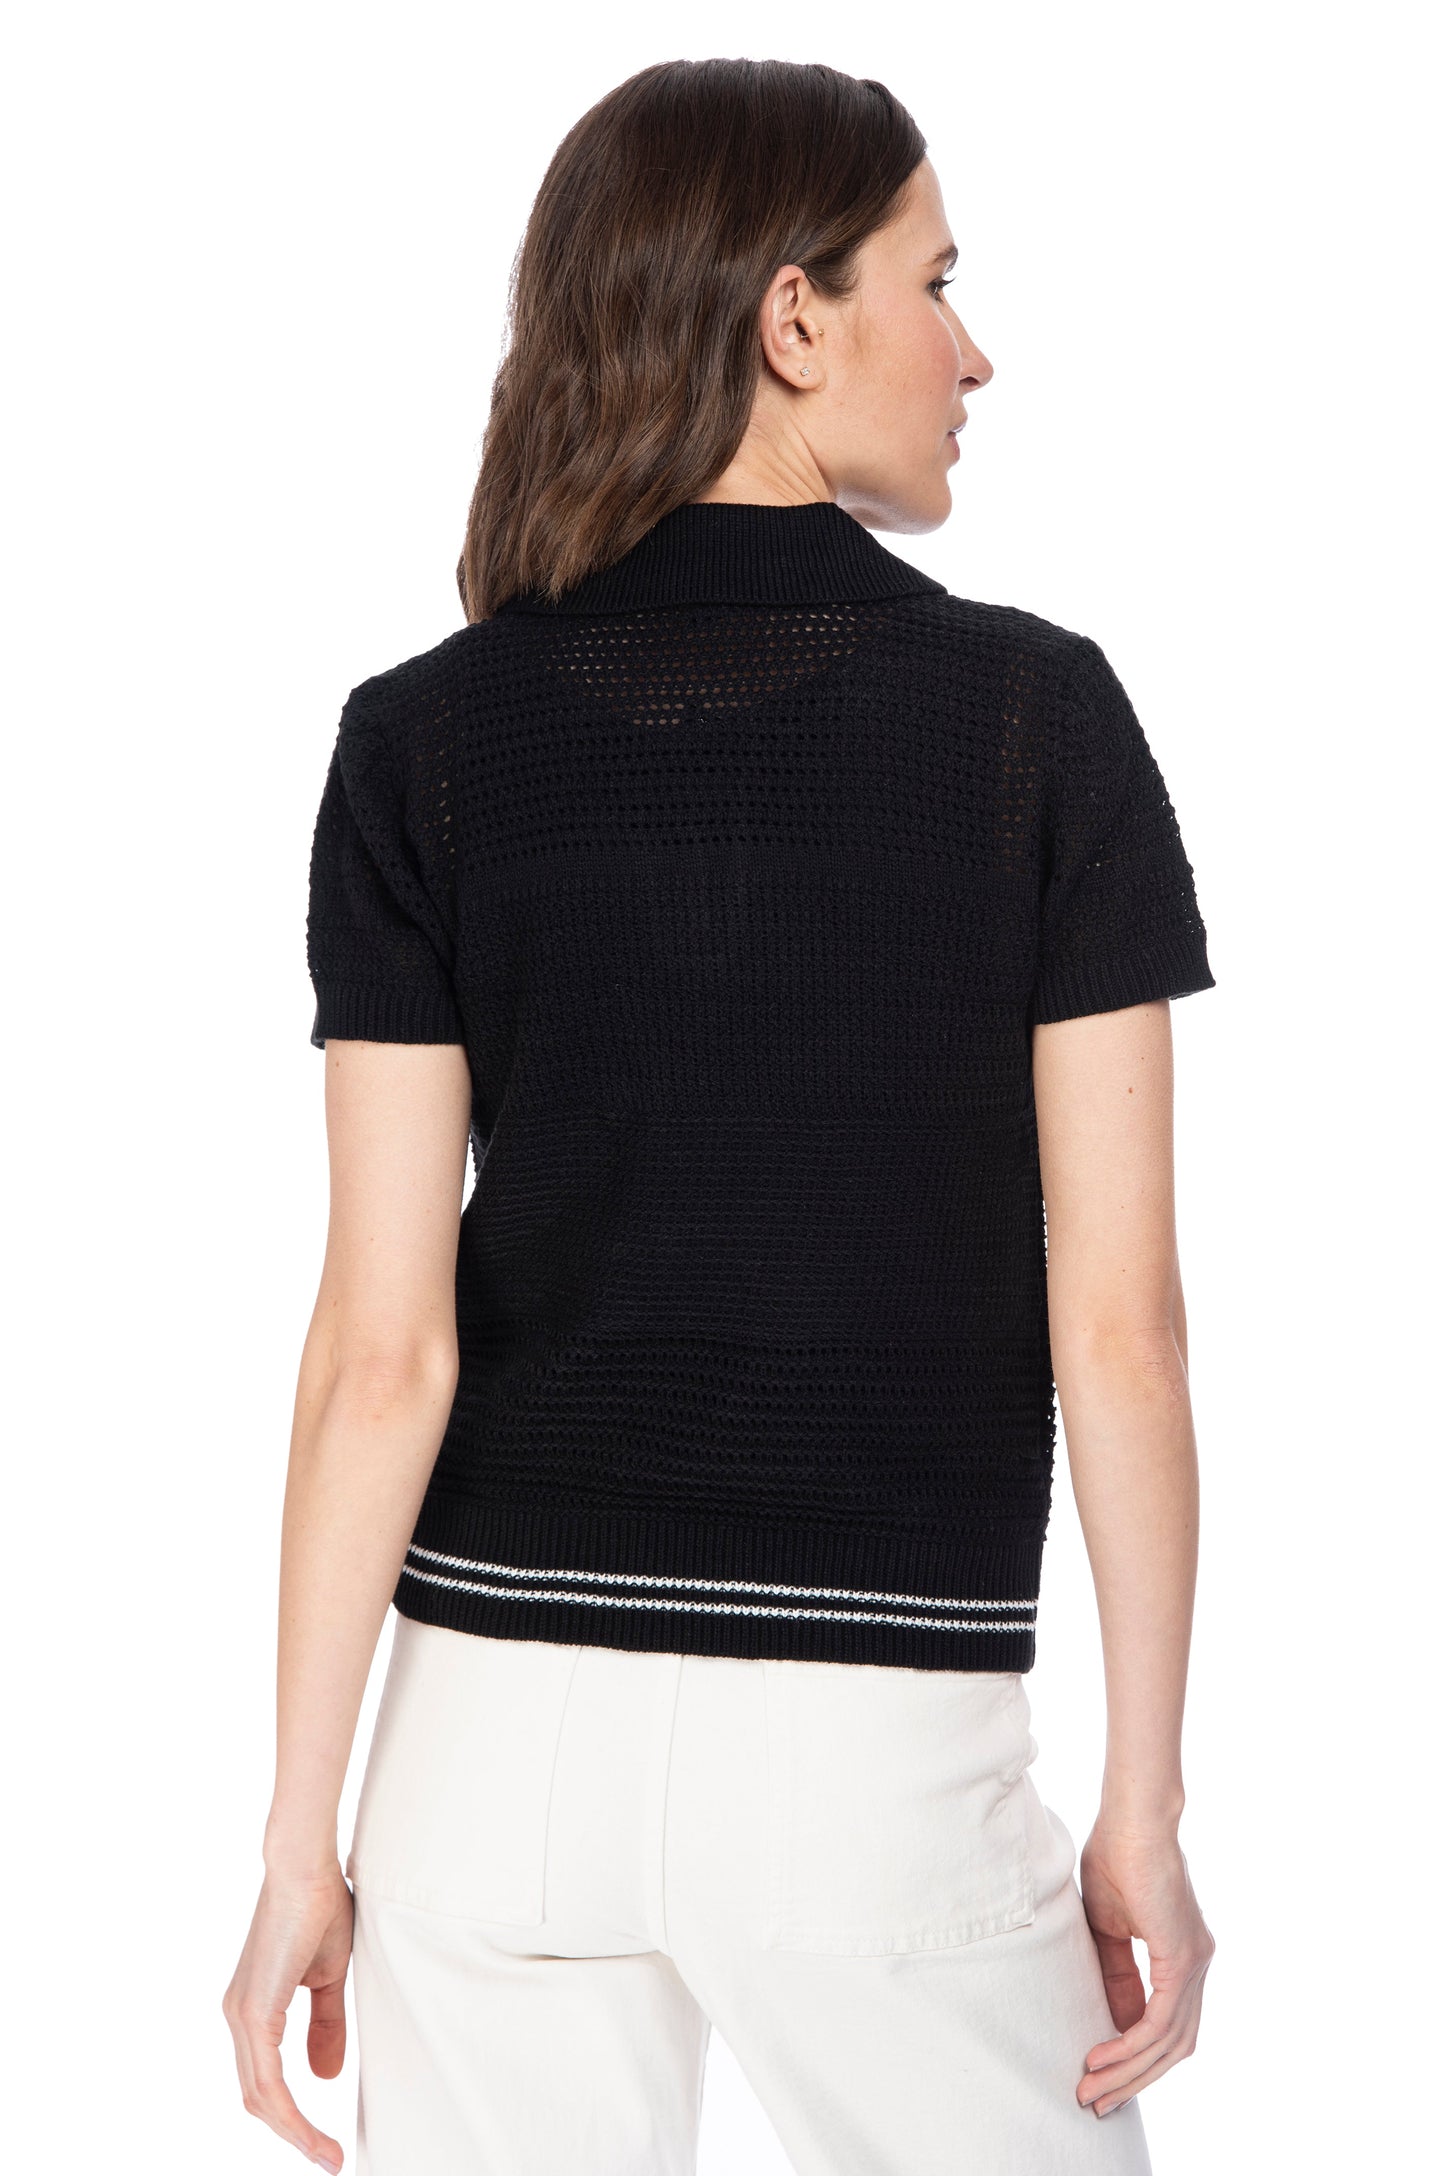 A woman photographed from behind, wearing a black short-sleeve B Collection by Bobeau POLO OPEN WEAVE SWEATER and white pants with racer stripe detail.